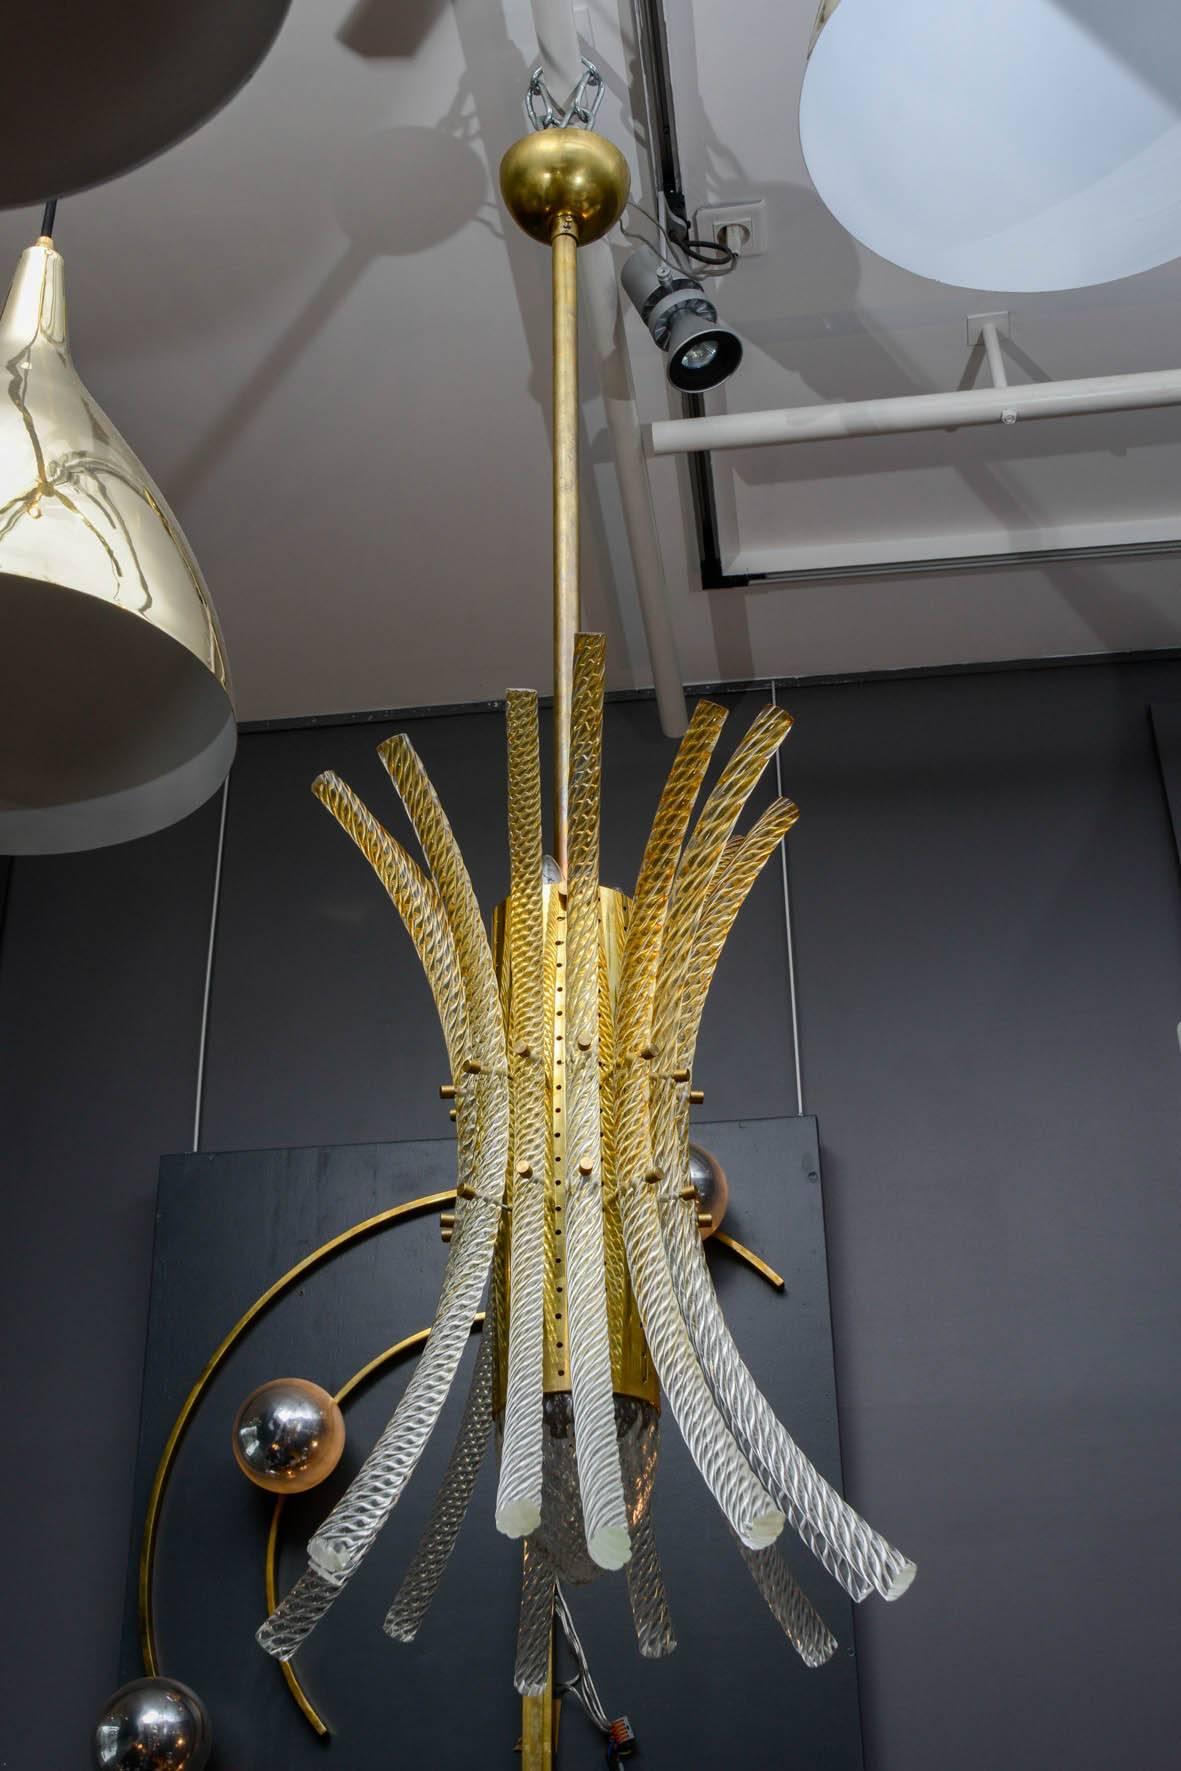 Pair of pendants made of a brass perforated centerpiece holding the lights, and 12 bent and swirled Murano glass rods, tinted at the top.